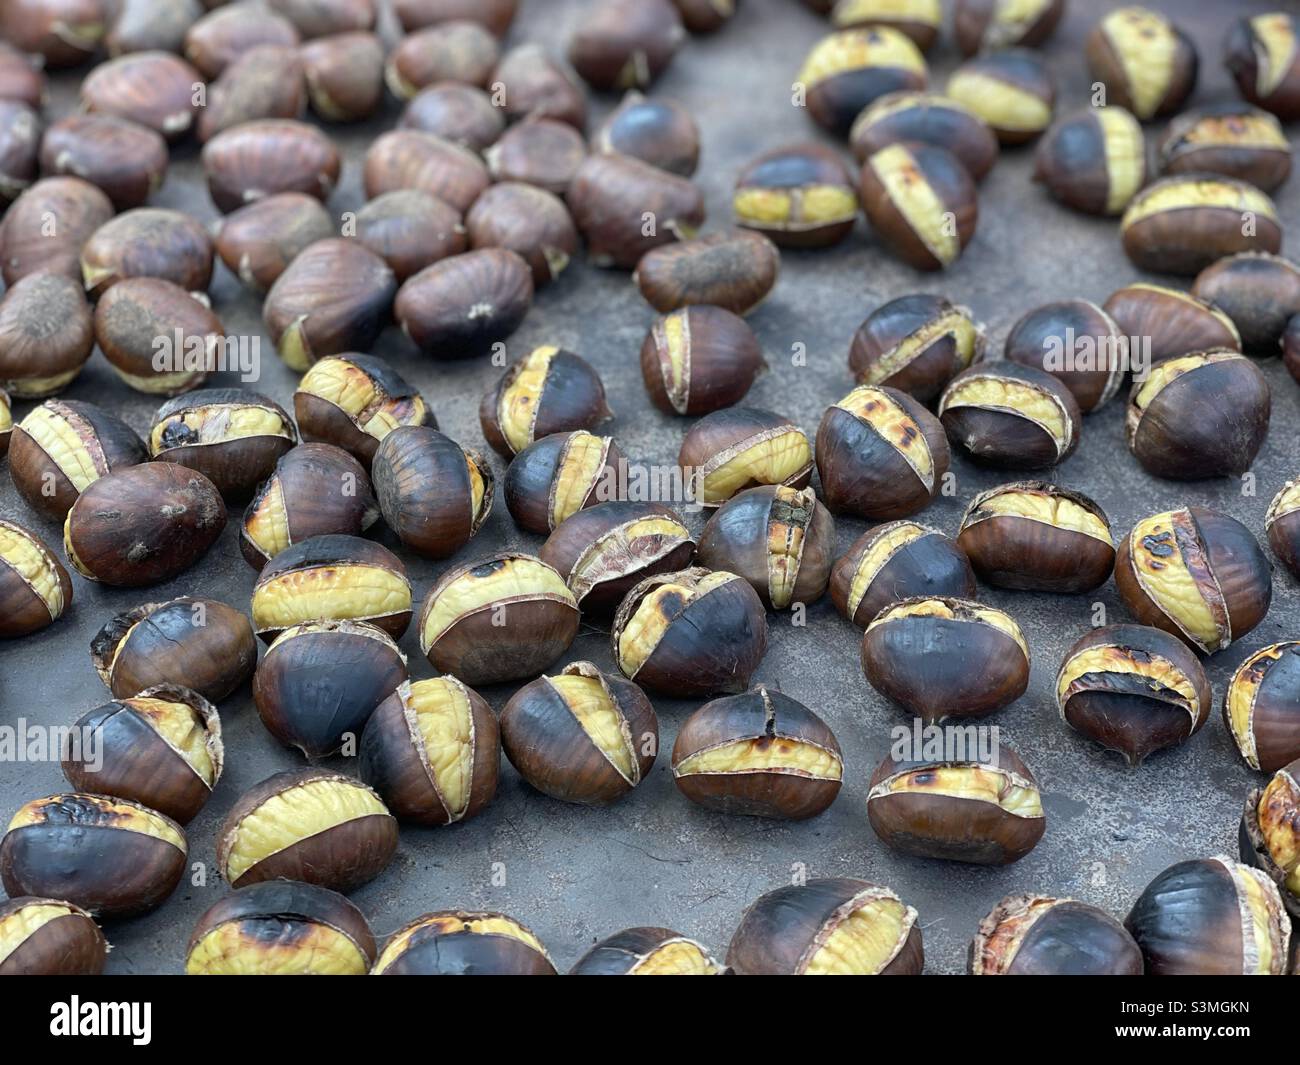 Chestnuts roasting at an outside food market in Italy Stock Photo